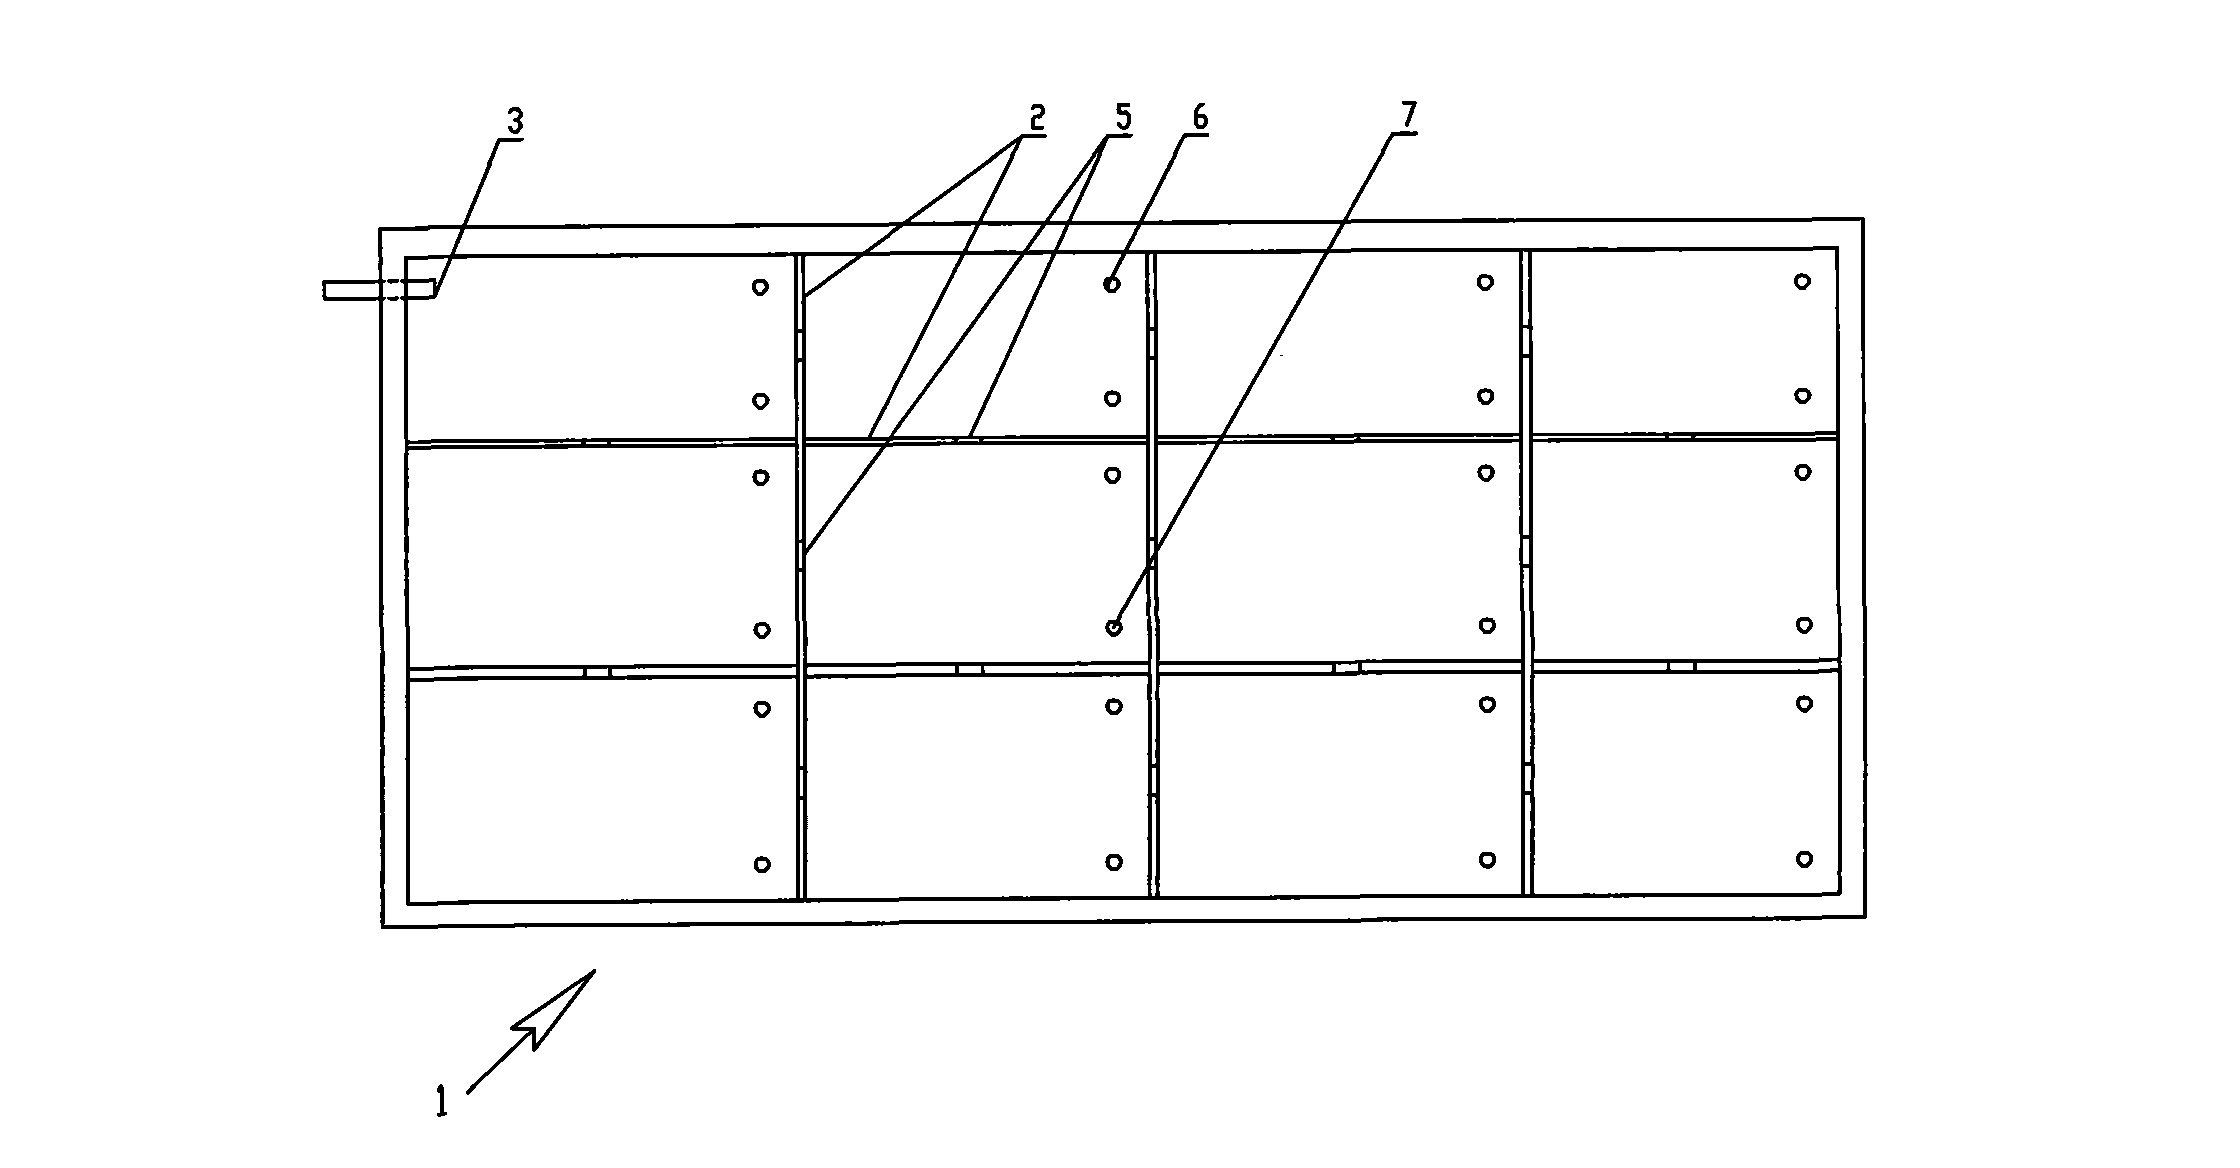 Water evaporating device